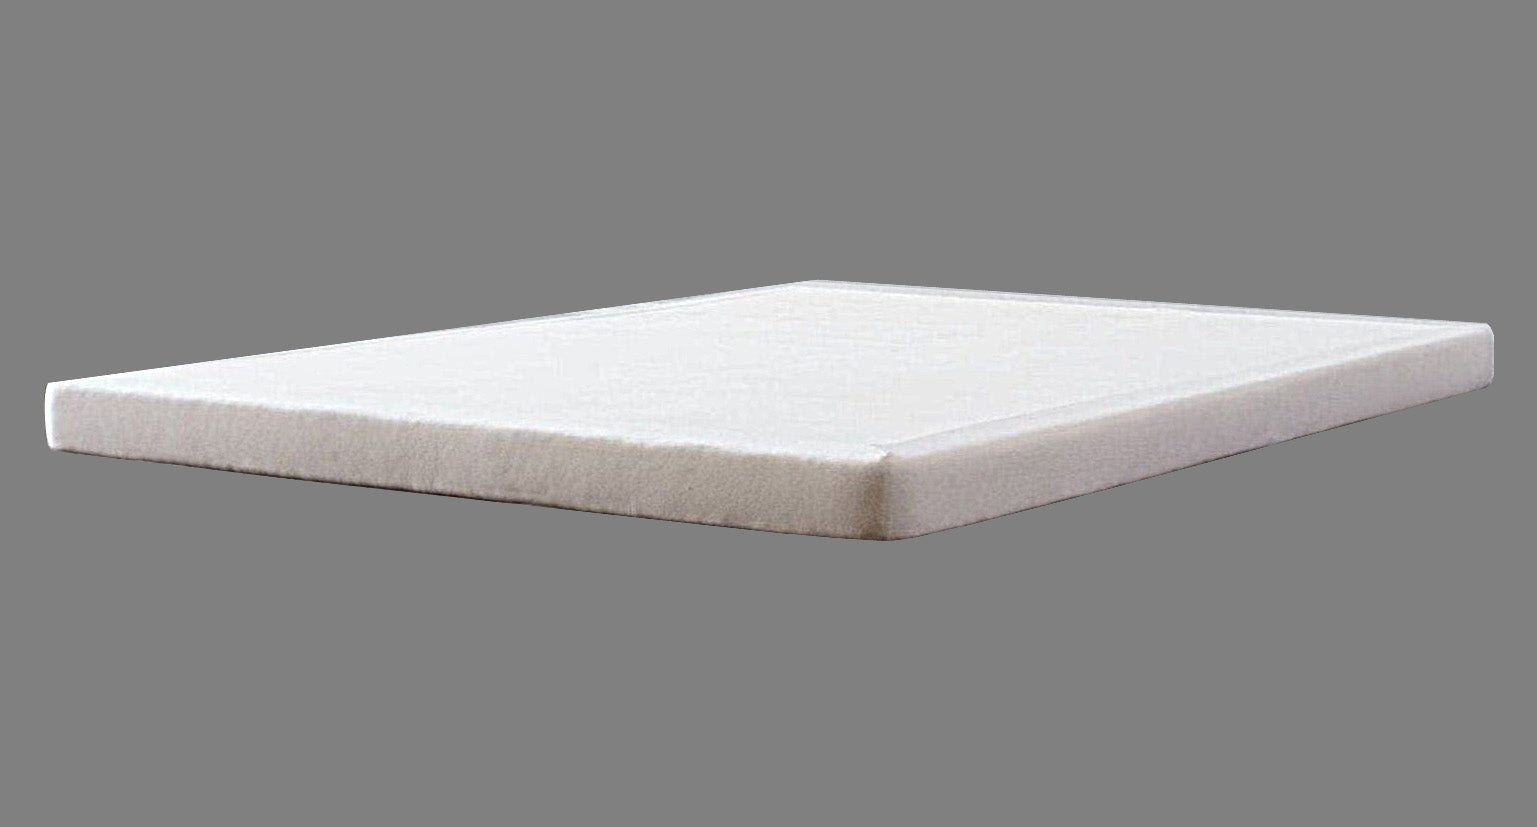 low profile 4 inch Obasan Foundation - a direct box spring replacement